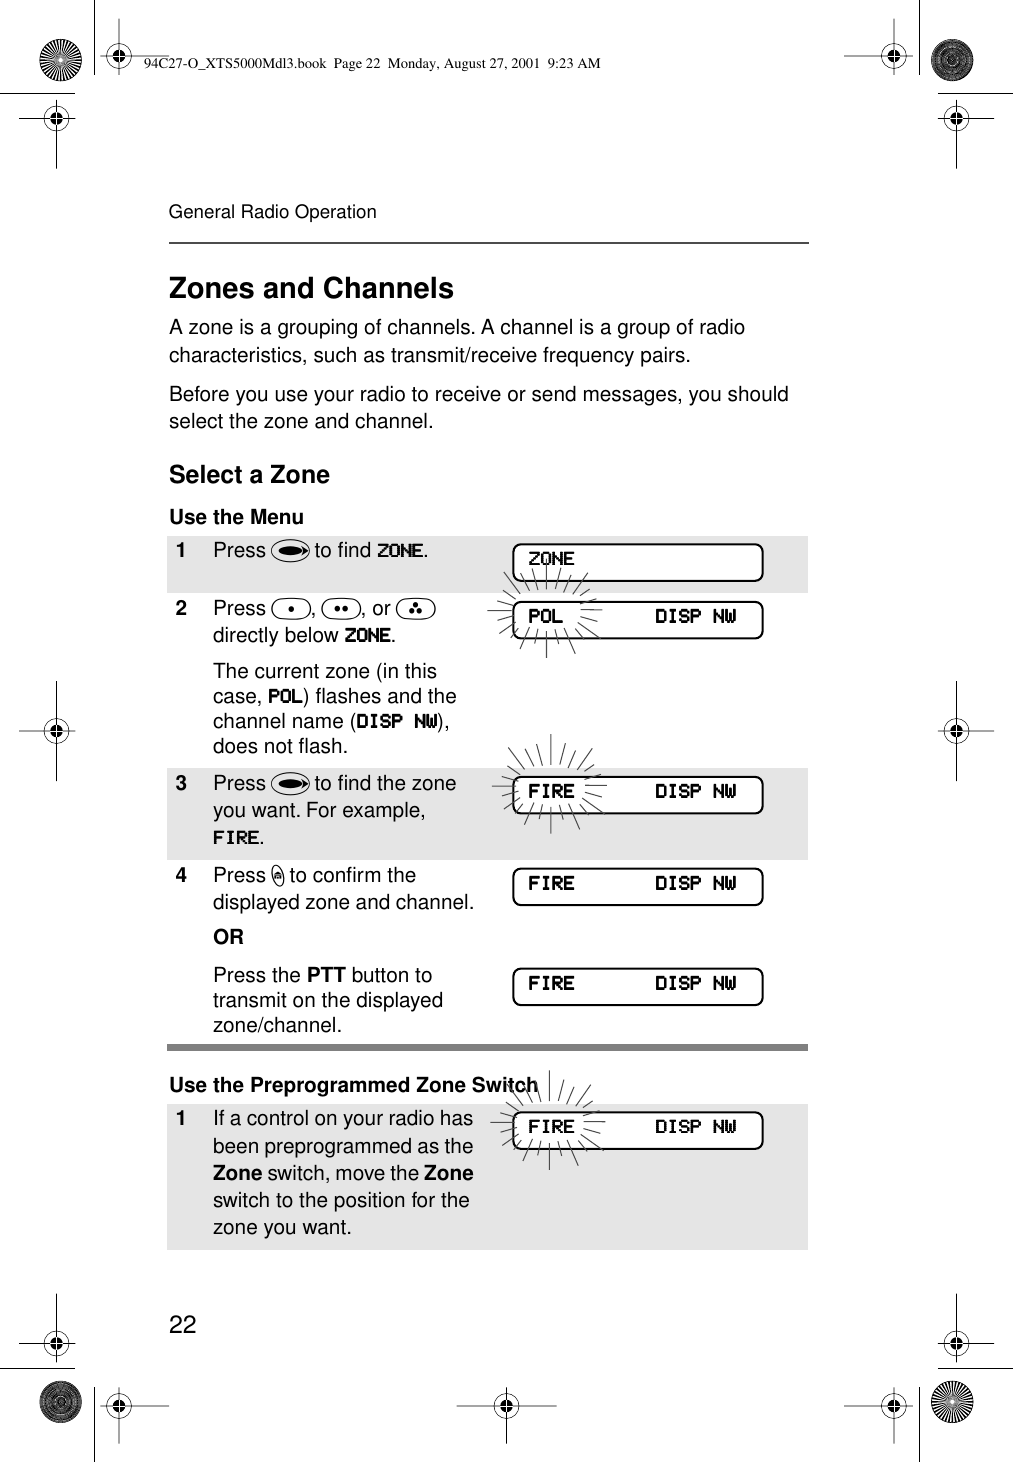 22General Radio OperationZones and ChannelsA zone is a grouping of channels. A channel is a group of radio characteristics, such as transmit/receive frequency pairs. Before you use your radio to receive or send messages, you should select the zone and channel.Select a ZoneUse the Menu Use the Preprogrammed Zone Switch1Press U to ﬁnd ZZZZOOOONNNNEEEE.2Press D, E, or F directly below ZZZZOOOONNNNEEEE.The current zone (in this case, PPPPOOOOLLLL) ﬂashes and the channel name (DDDDIIIISSSSPPPP    NNNNWWWW), does not ﬂash.3Press U to ﬁnd the zone you want. For example, FFFFIIIIRRRREEEE.4Press h to conﬁrm the displayed zone and channel. ORPress the PTT button to transmit on the displayed zone/channel.1If a control on your radio has been preprogrammed as the Zone switch, move the Zone switch to the position for the zone you want. ZZZZOOOONNNNEEEEPPPPOOOOLLLL                                DDDDIIIISSSSPPPP    NNNNWWWWFFFFIIIIRRRREEEE                            DDDDIIIISSSSPPPP    NNNNWWWWFFFFIIIIRRRREEEE                            DDDDIIIISSSSPPPP    NNNNWWWWFFFFIIIIRRRREEEE                            DDDDIIIISSSSPPPP    NNNNWWWWFFFFIIIIRRRREEEE                            DDDDIIIISSSSPPPP    NNNNWWWW94C27-O_XTS5000Mdl3.book  Page 22  Monday, August 27, 2001  9:23 AM